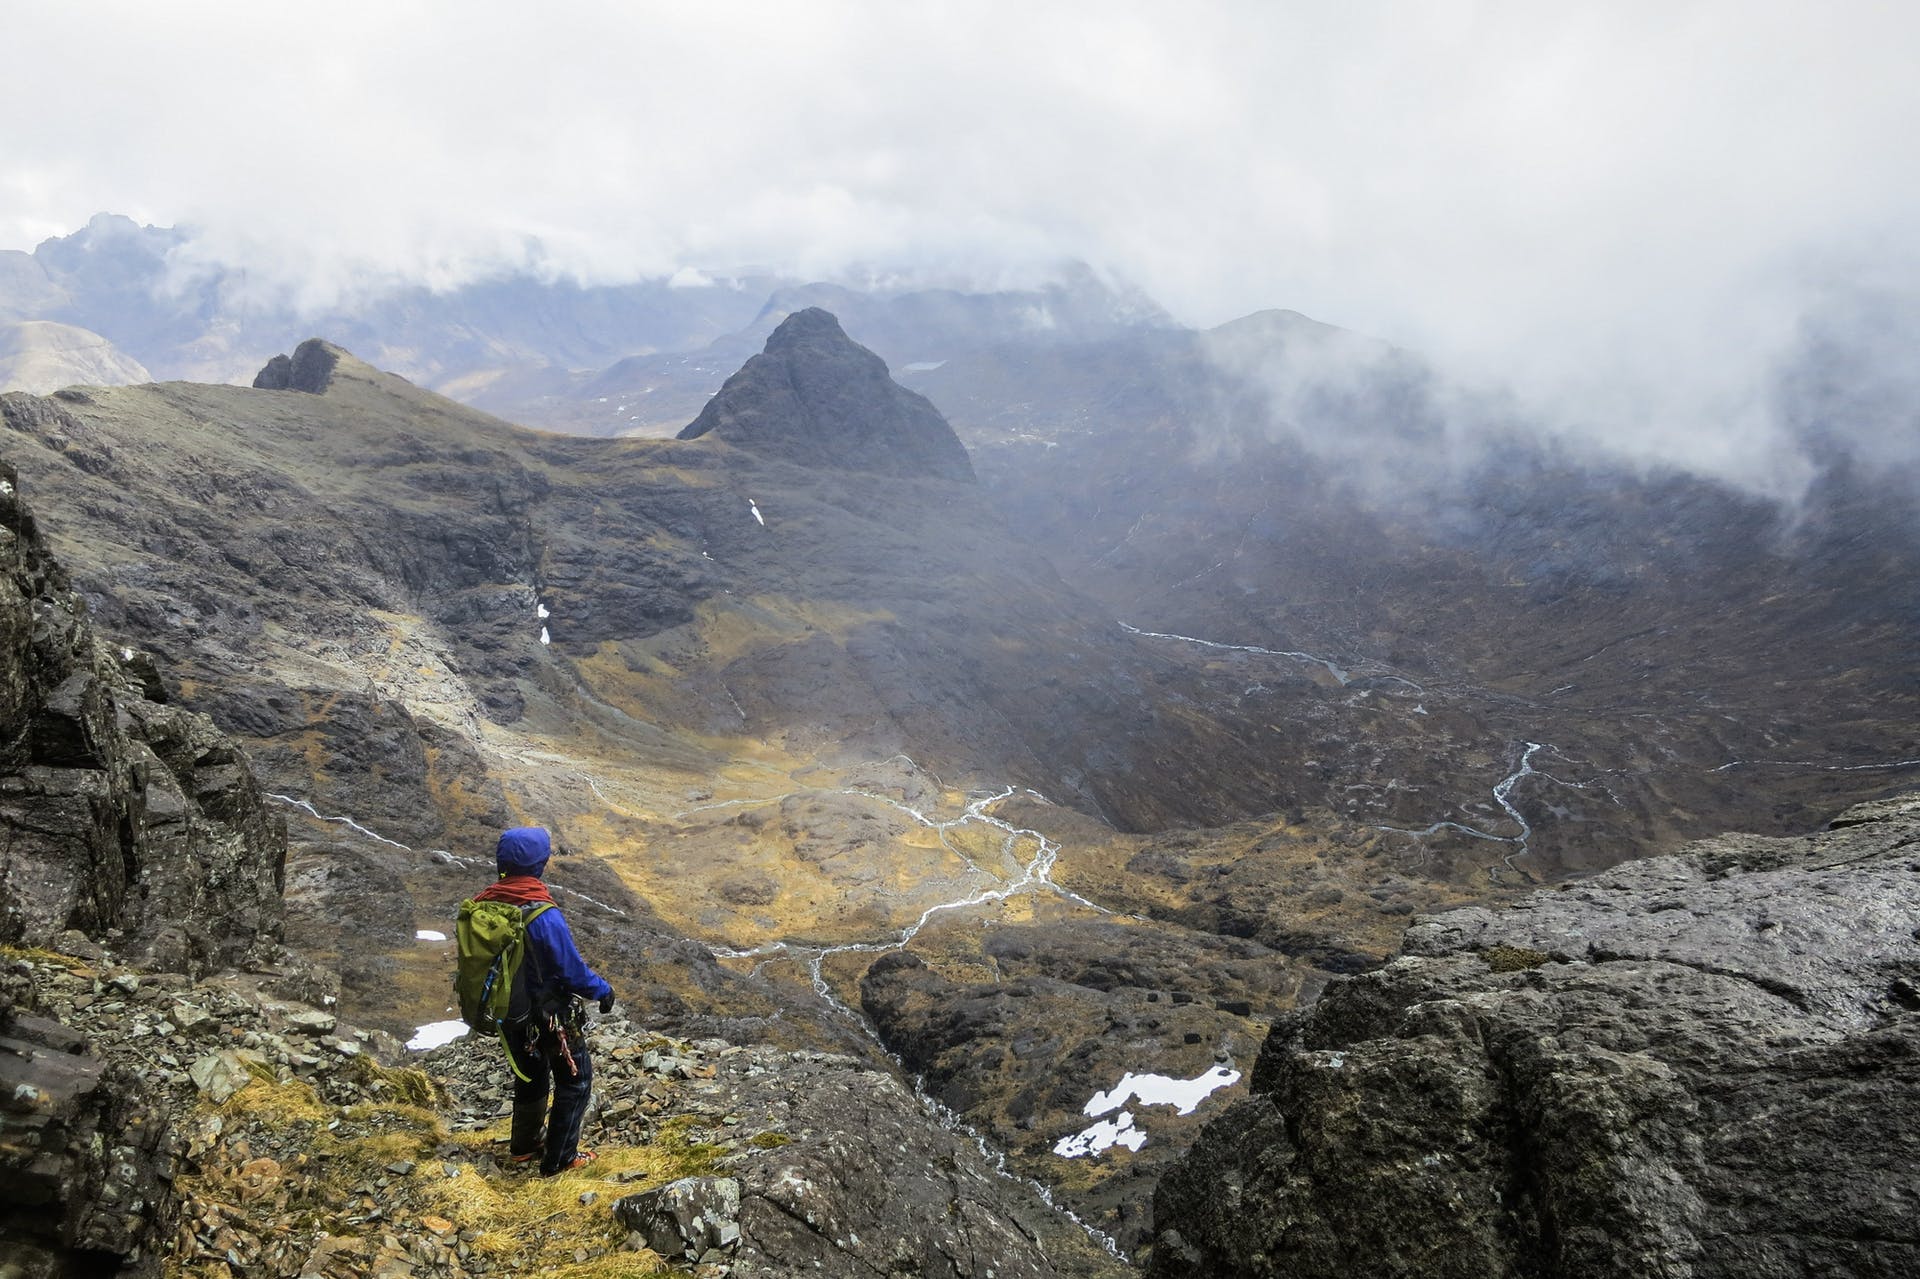 Views across the Cuillin Mountains on the Isle of Skye in Scotland